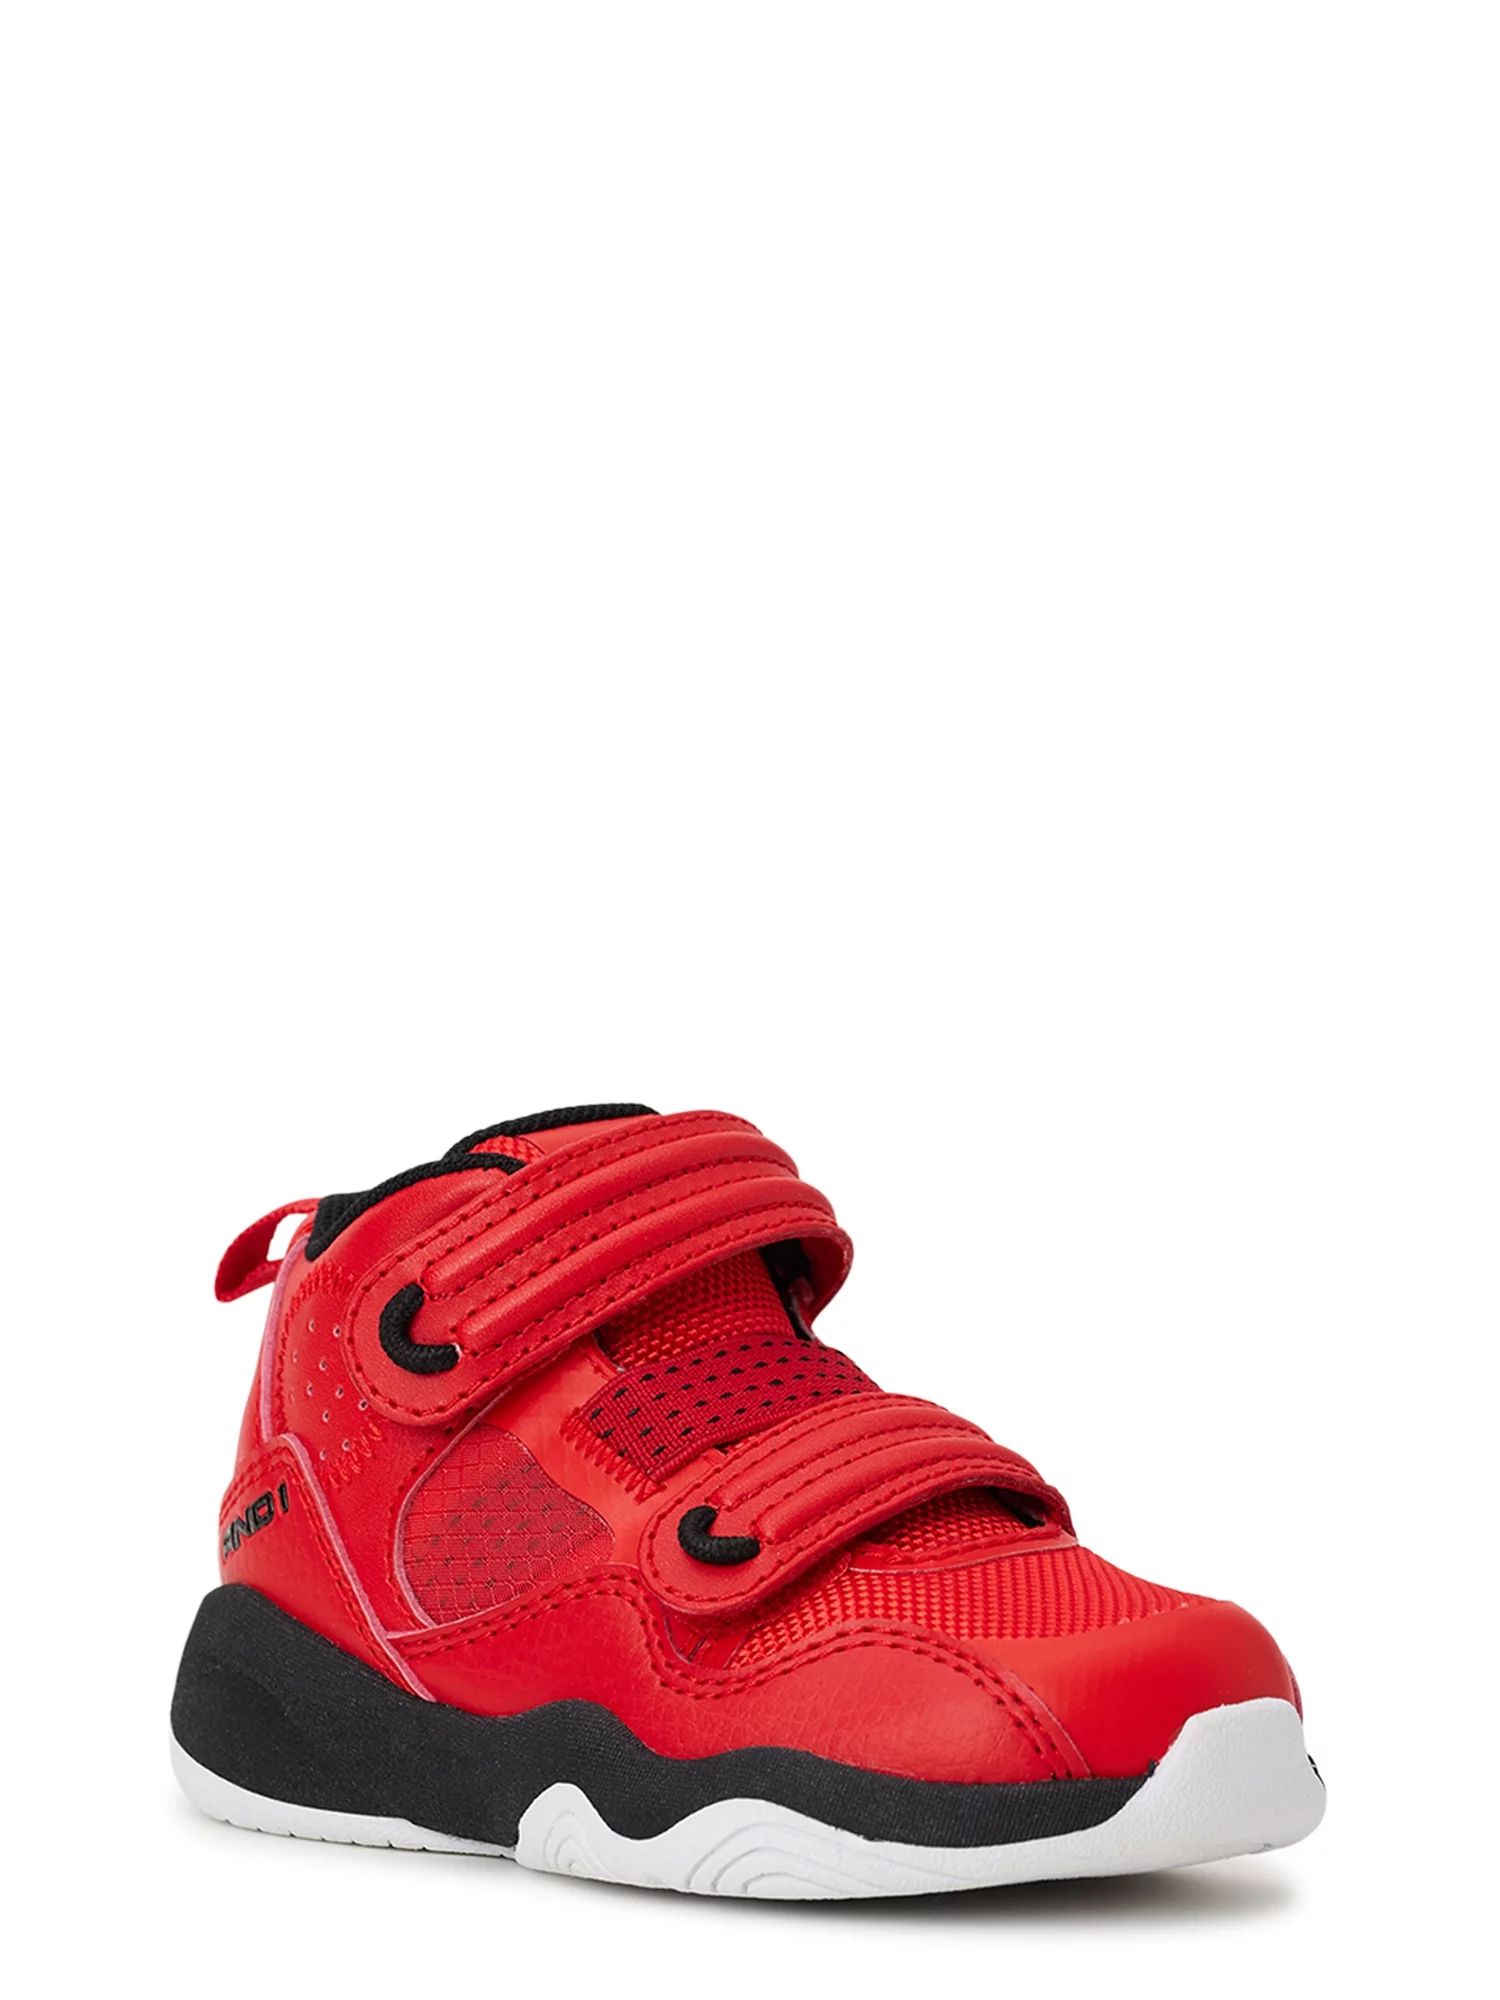 AND1 Toddler Boys Strap Basketball Sneakers 2.0, Sizes 5-12 - Walmart.com | Walmart (US)